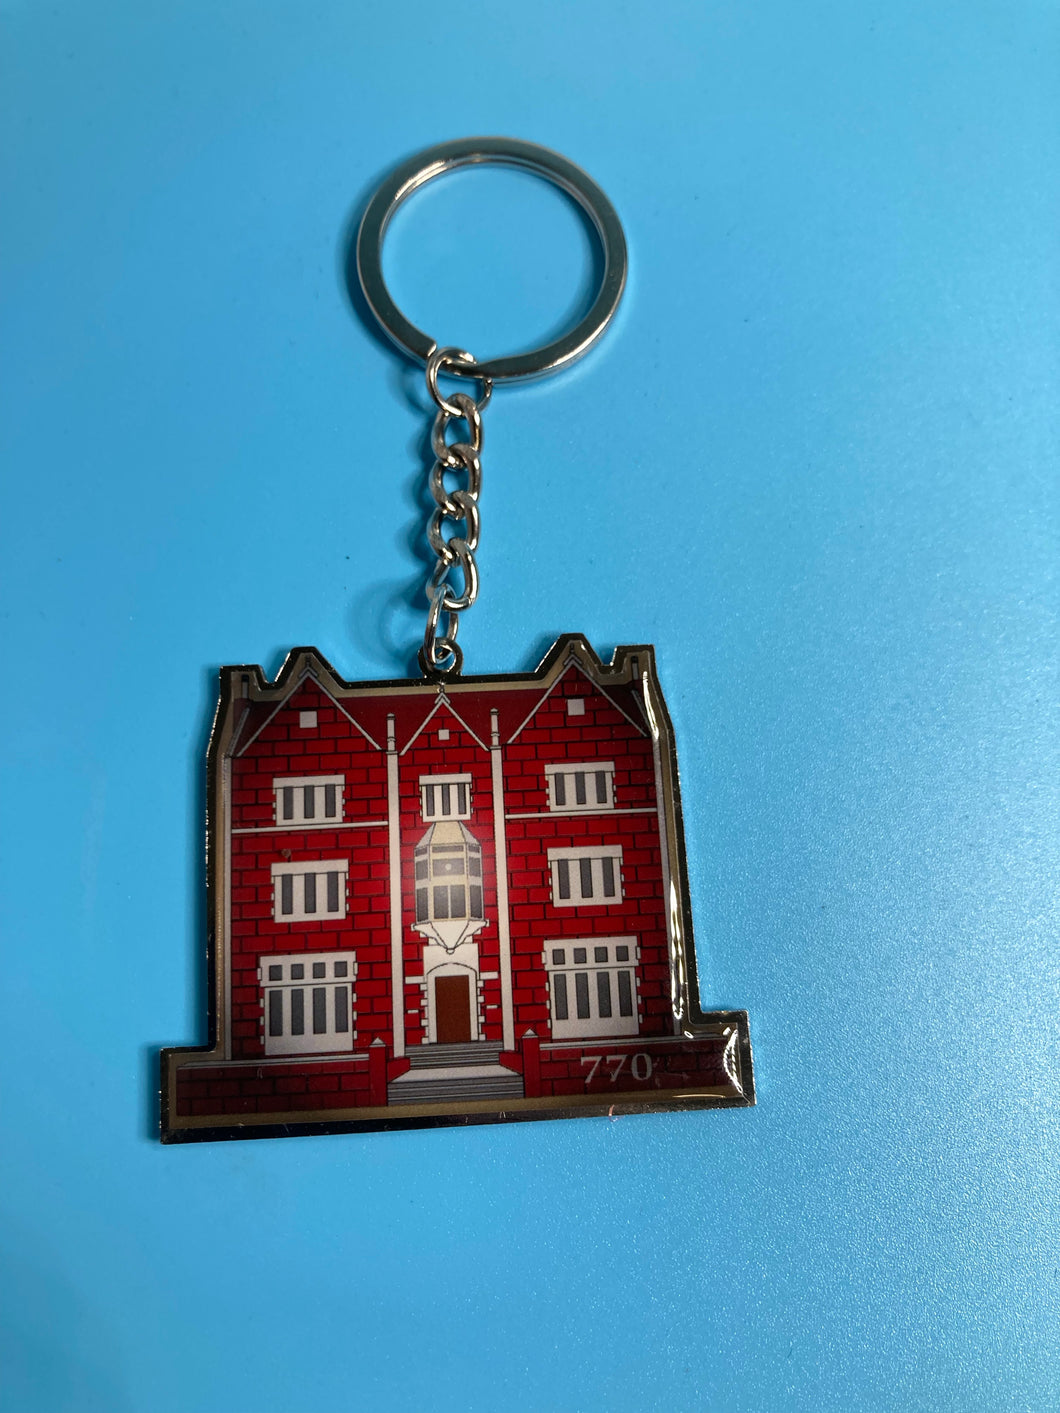 House of the Rebbe keychain 770